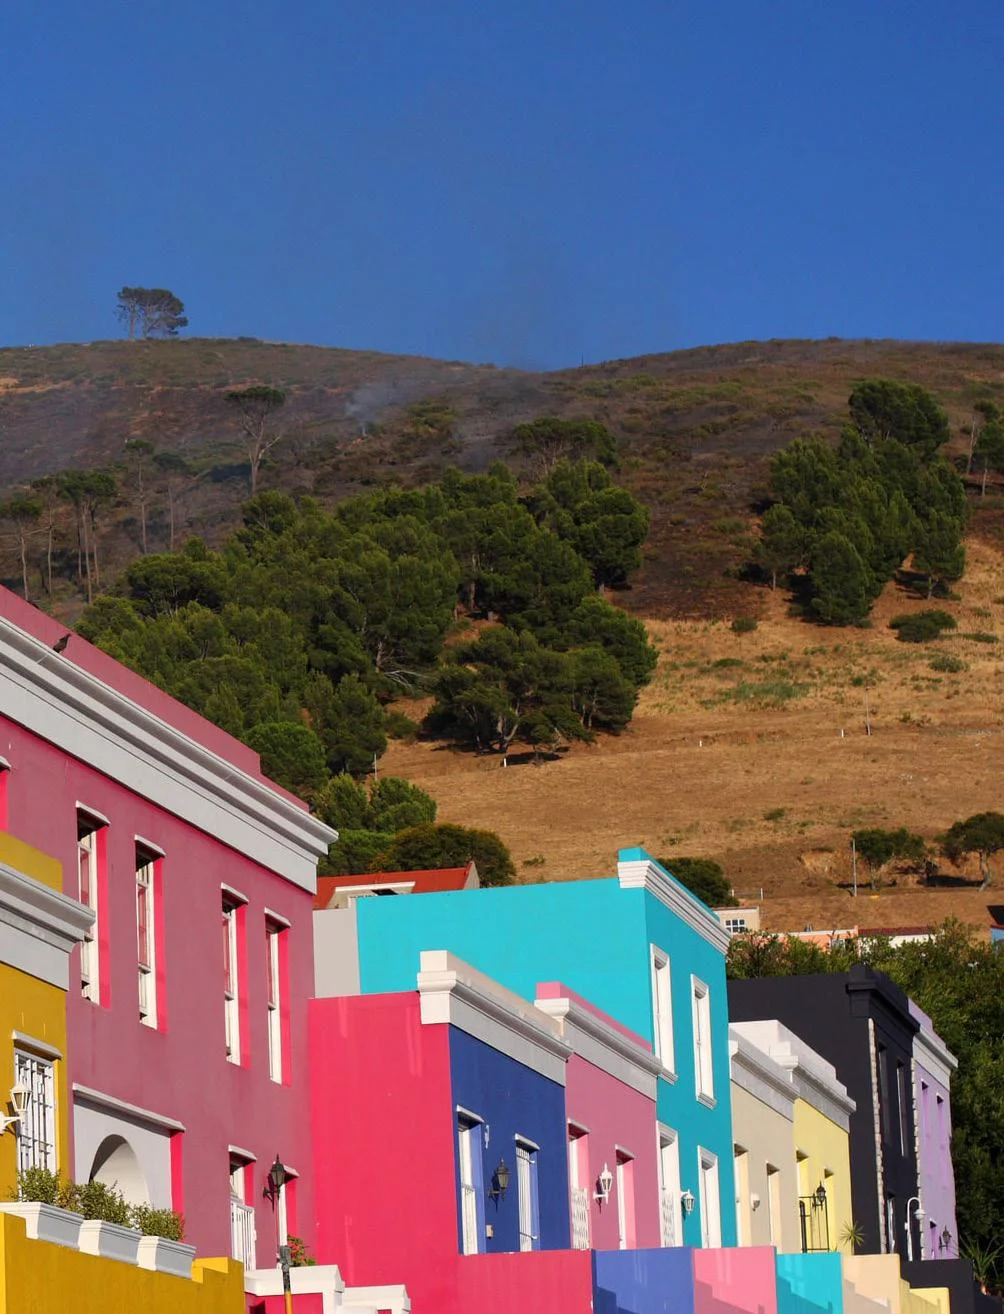 Which iconic street in Cape Town is known for its trendy shops, cafes, and nightlife?